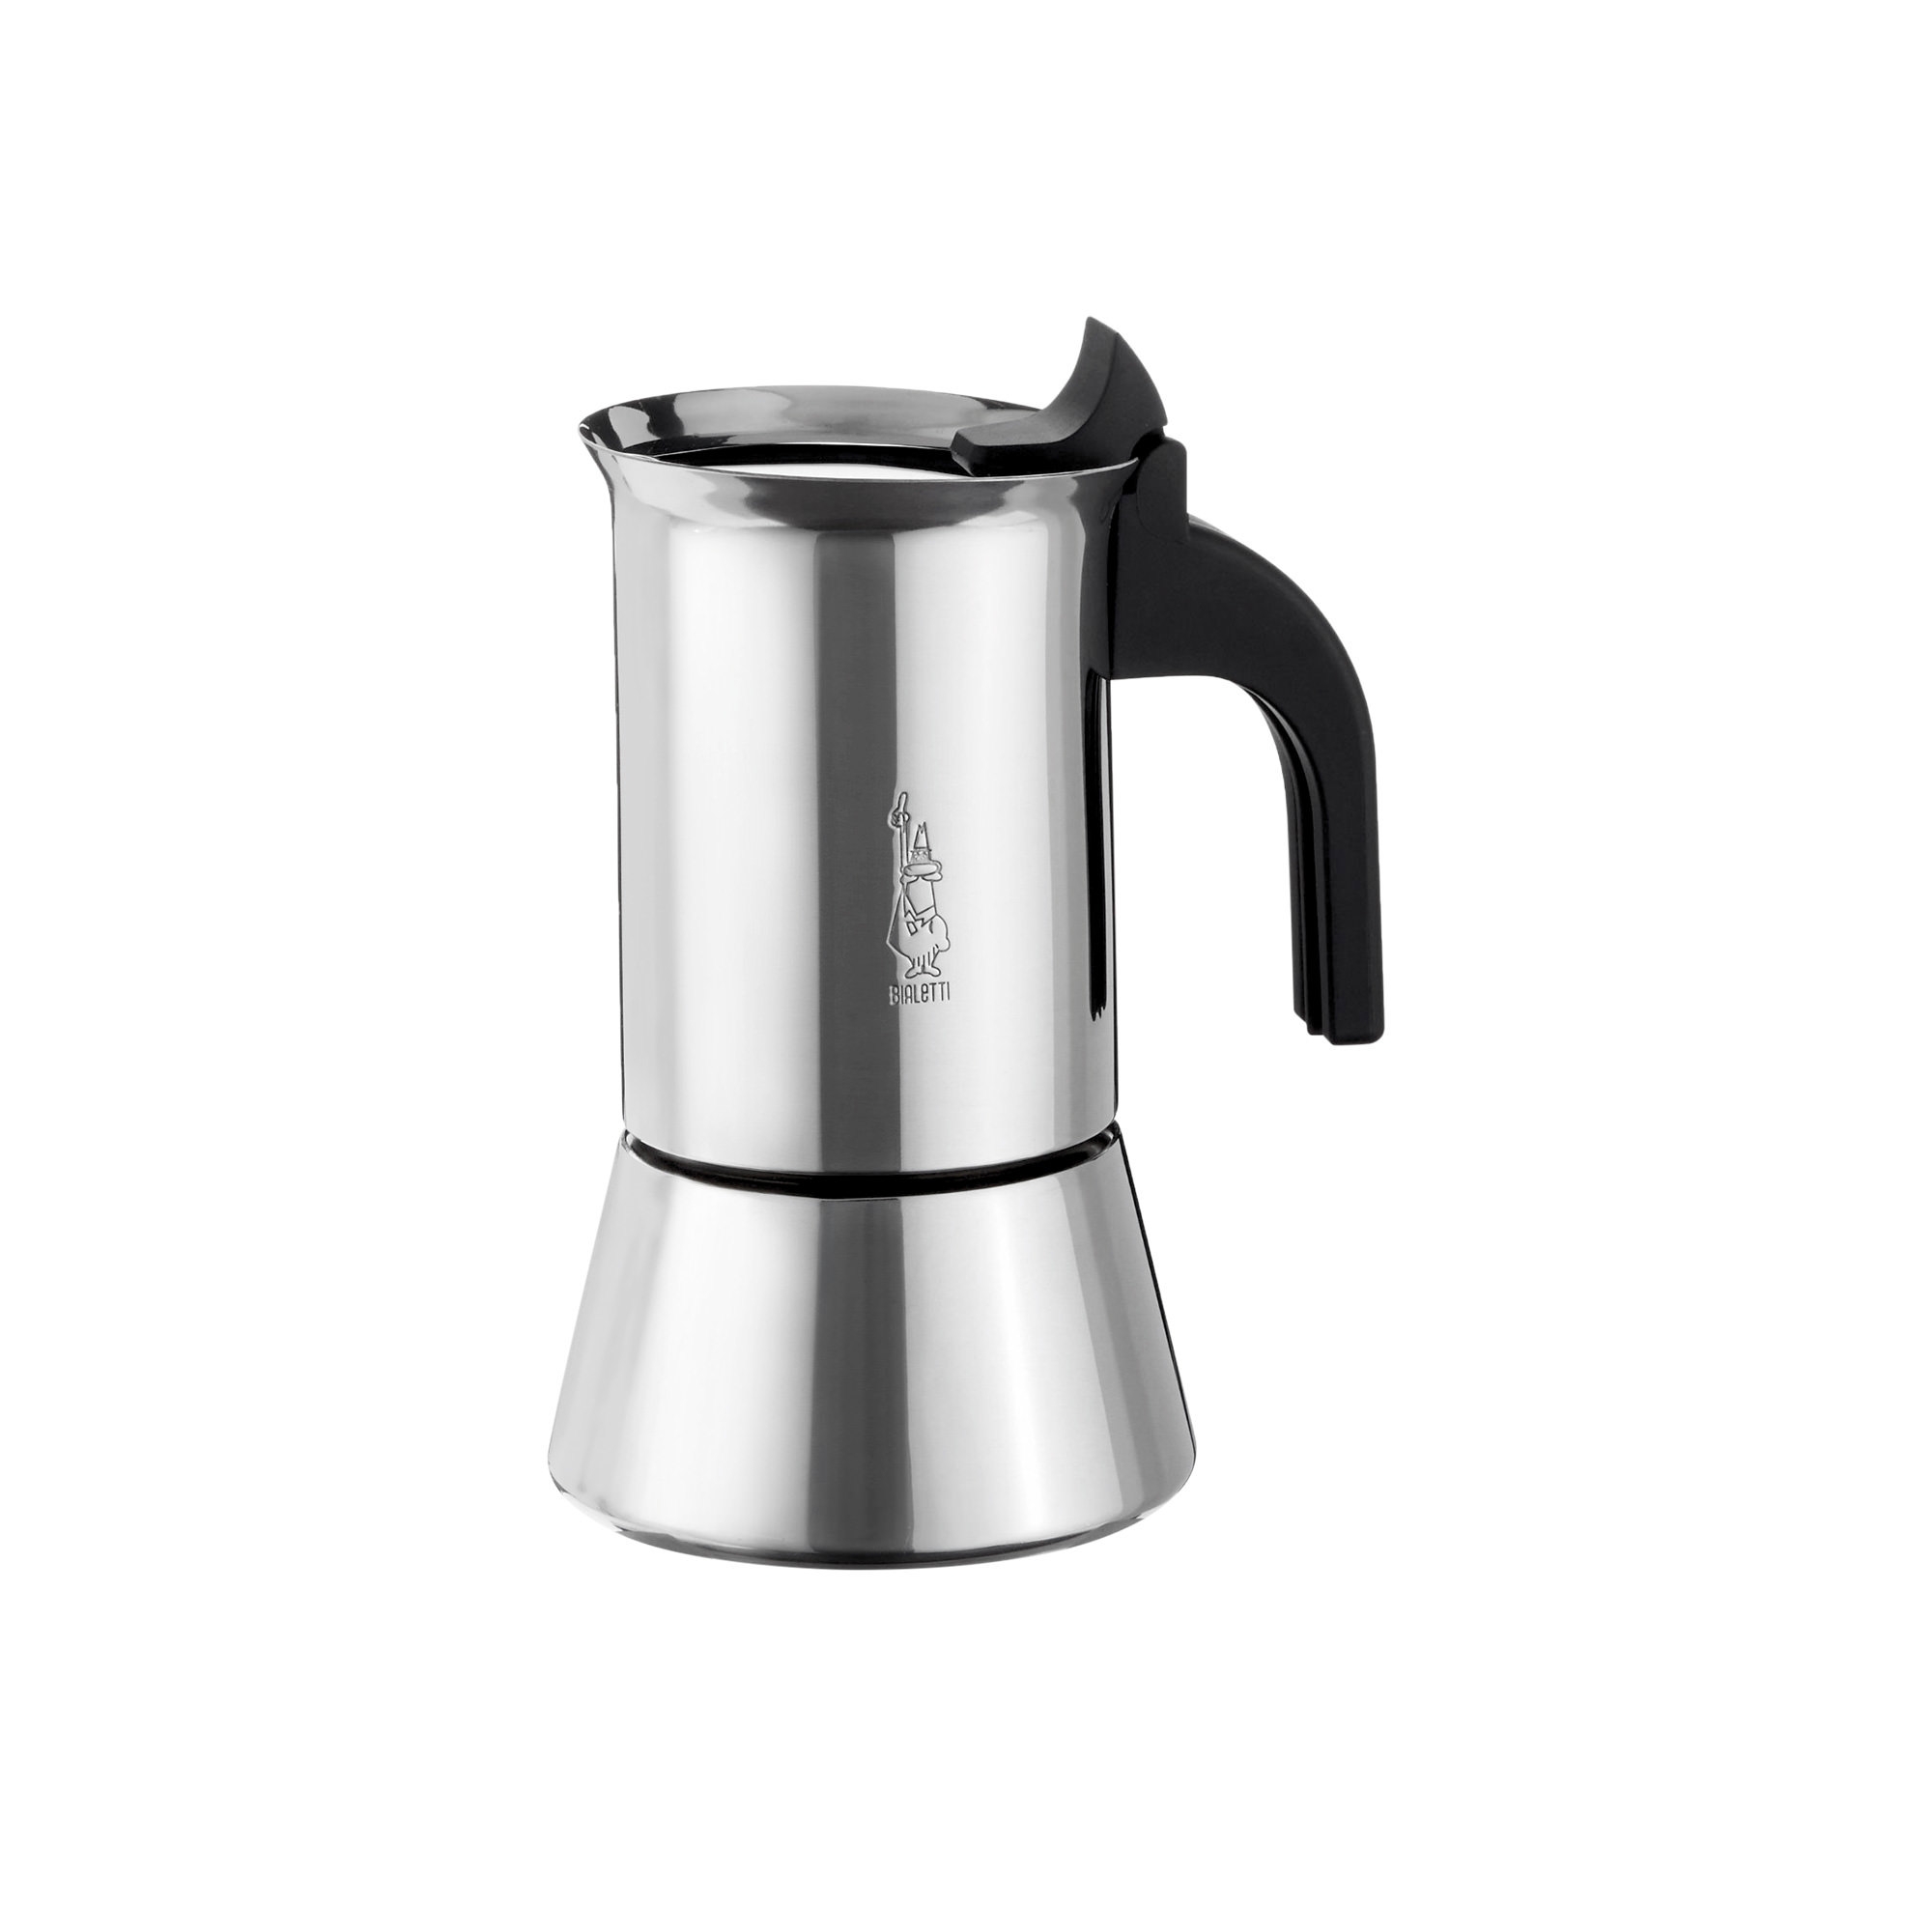 Bialetti Venus Stainless Steel Induction Espresso Maker 4 Cup Image 1